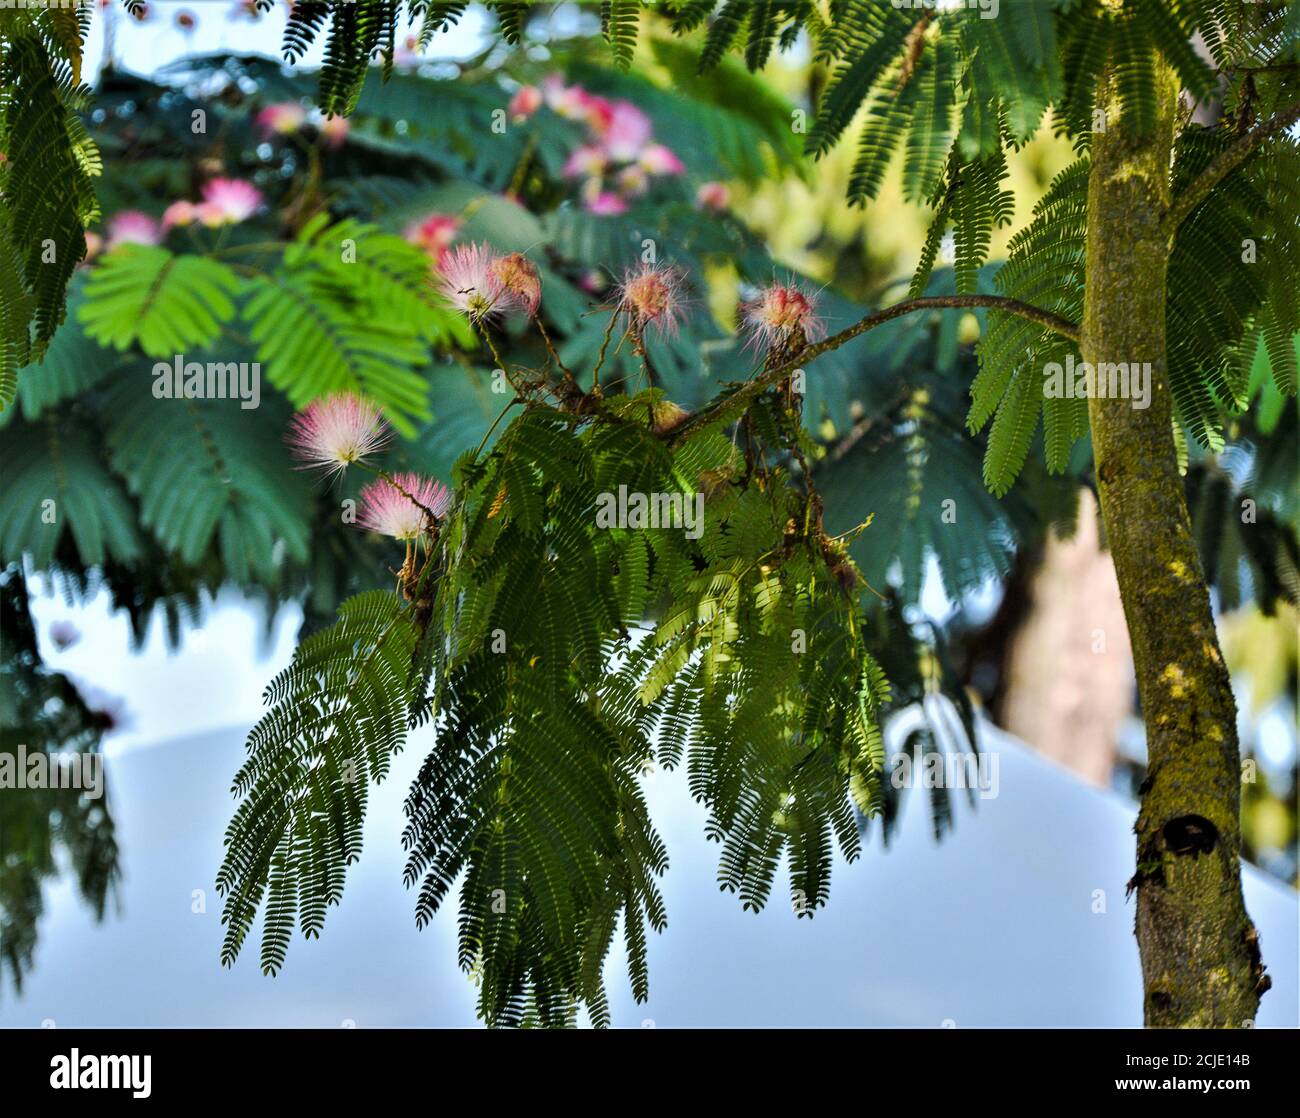 Persian silk tree, Albizia julibrissin var. Rosea is a type of palm with strange-looking flowers. Stock Photo